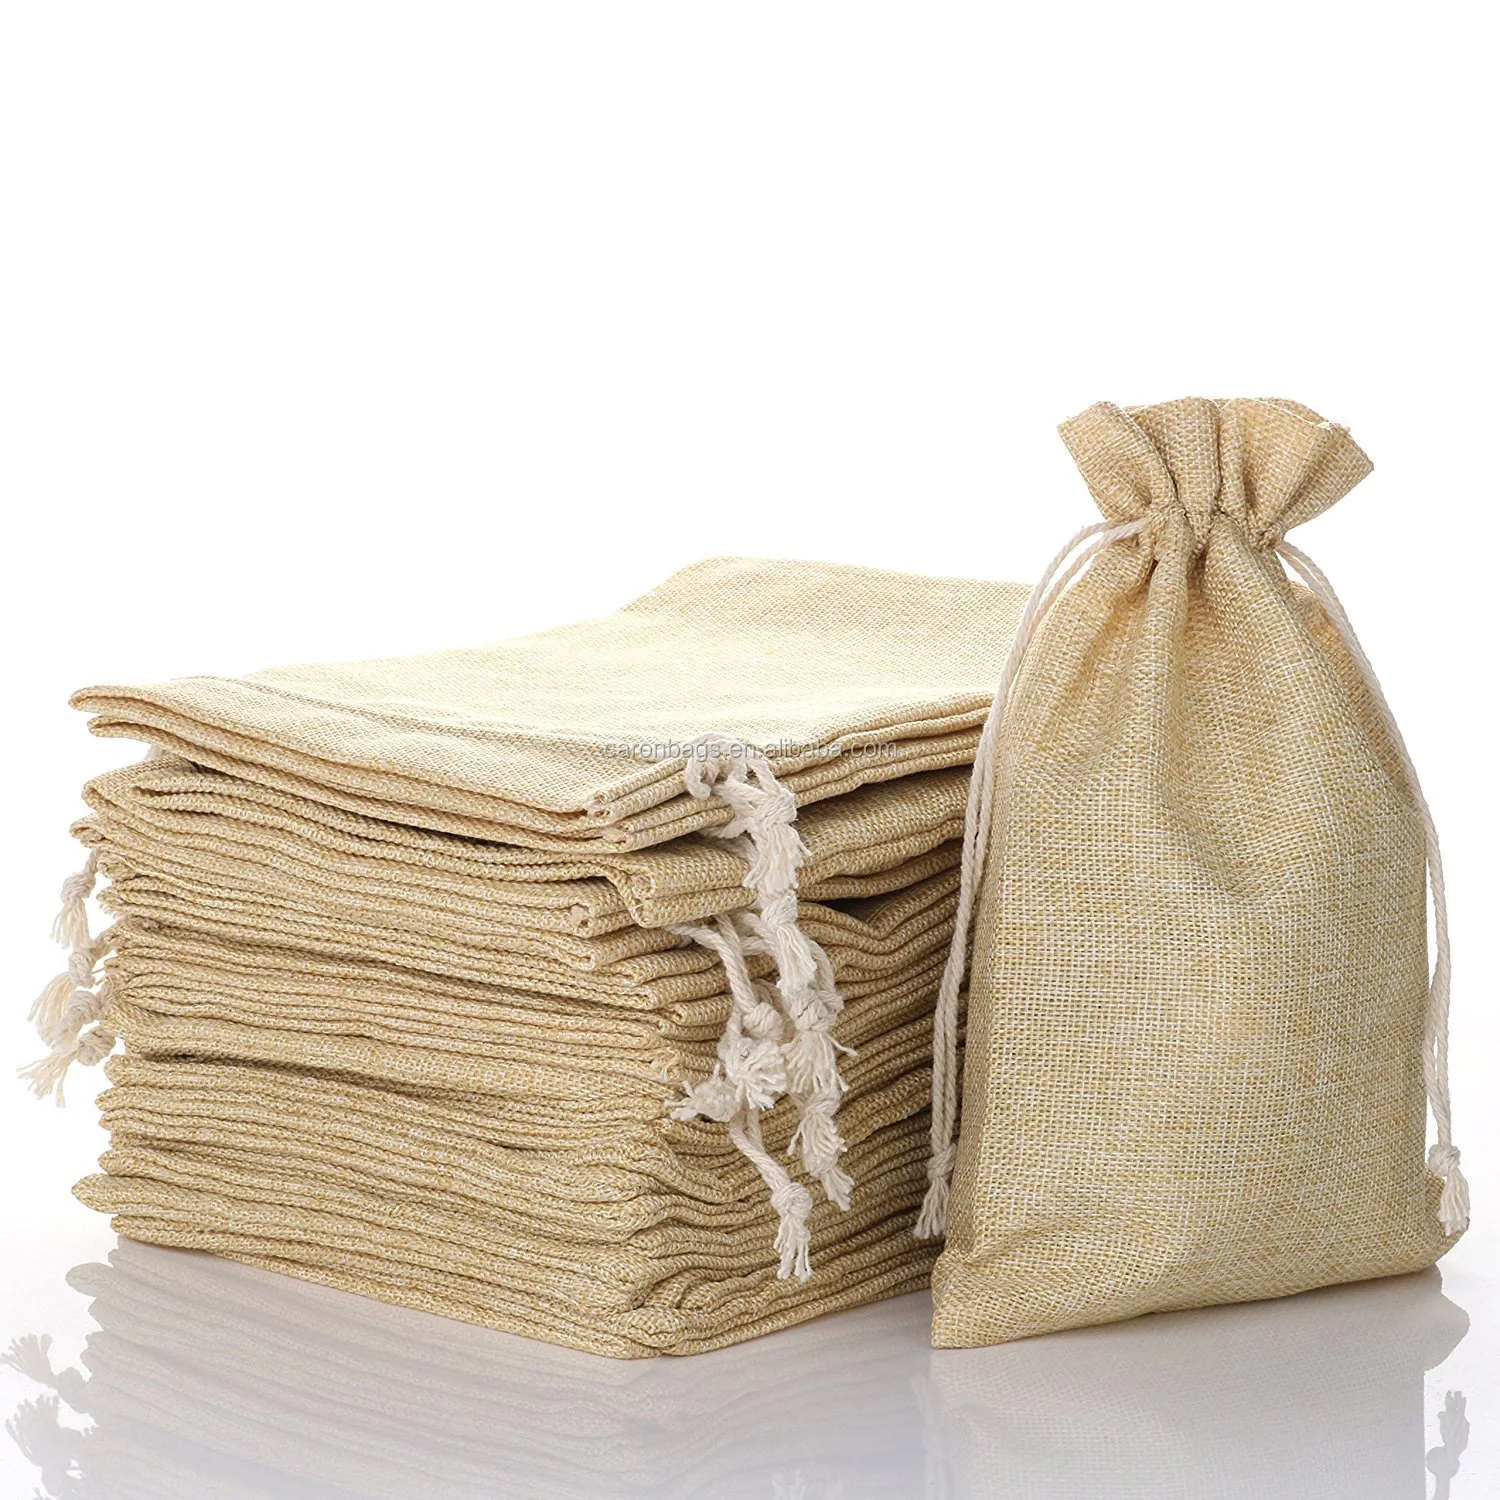 Details about   Light Coffee Wedding Favor Hessian Burlap Jute Gift Bags Drawstring Pouch 